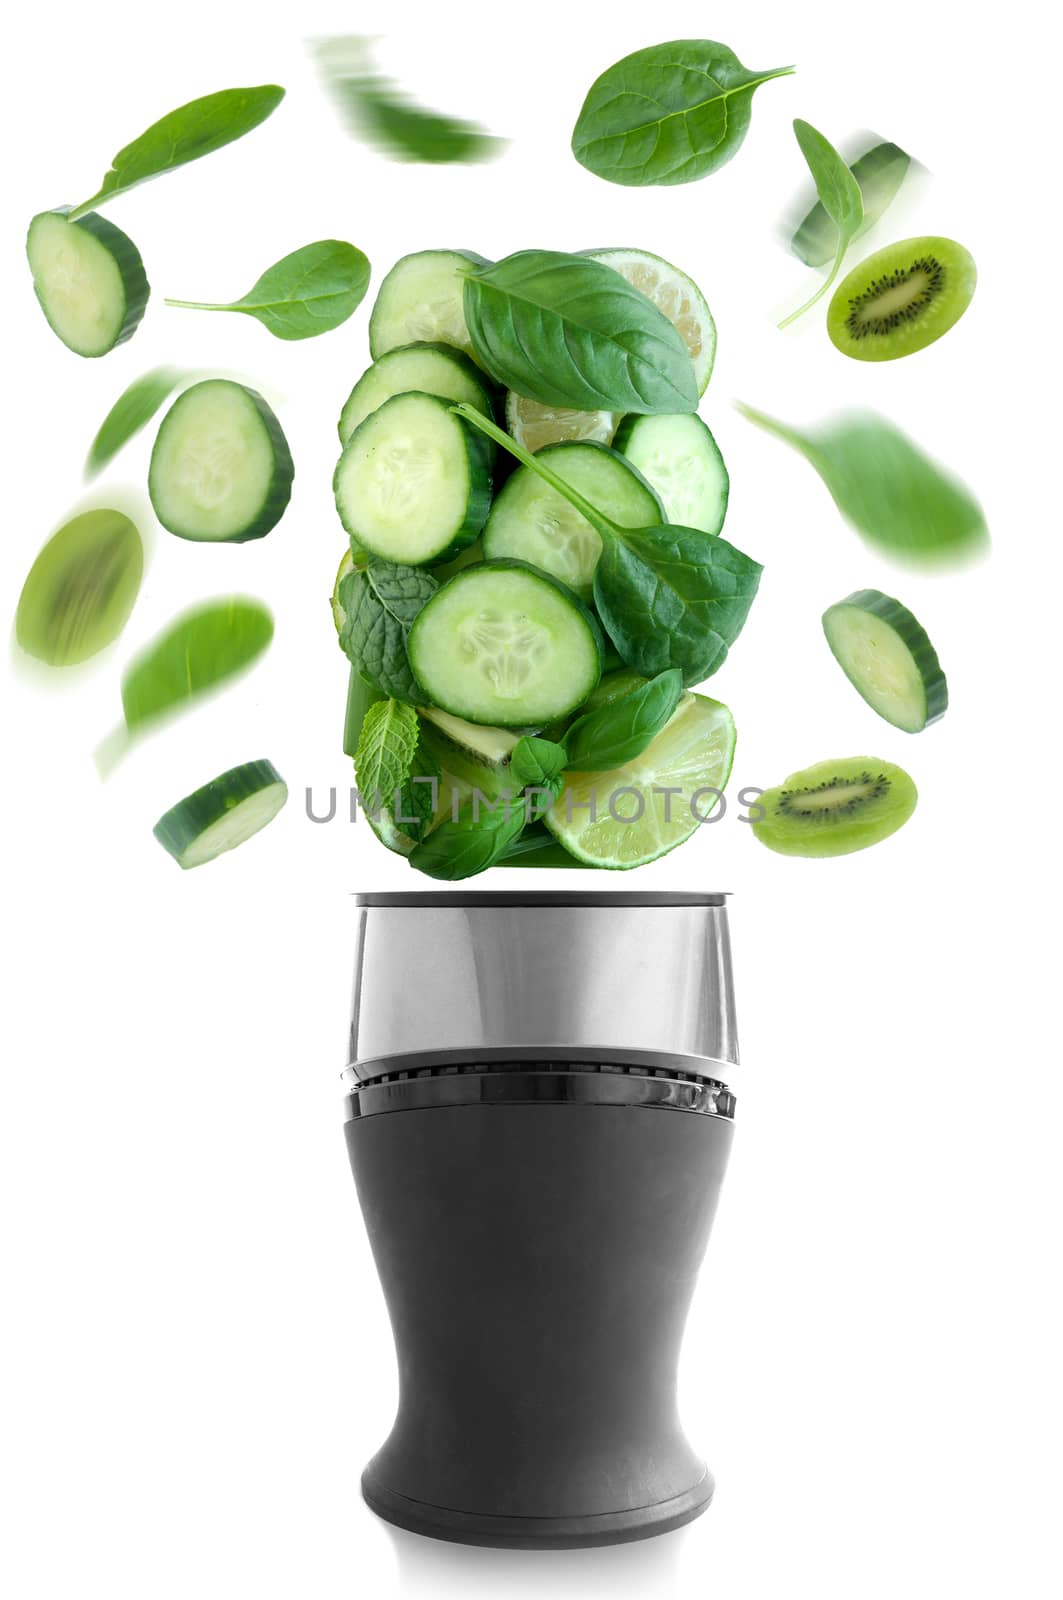 Green smoothie making concept by unikpix